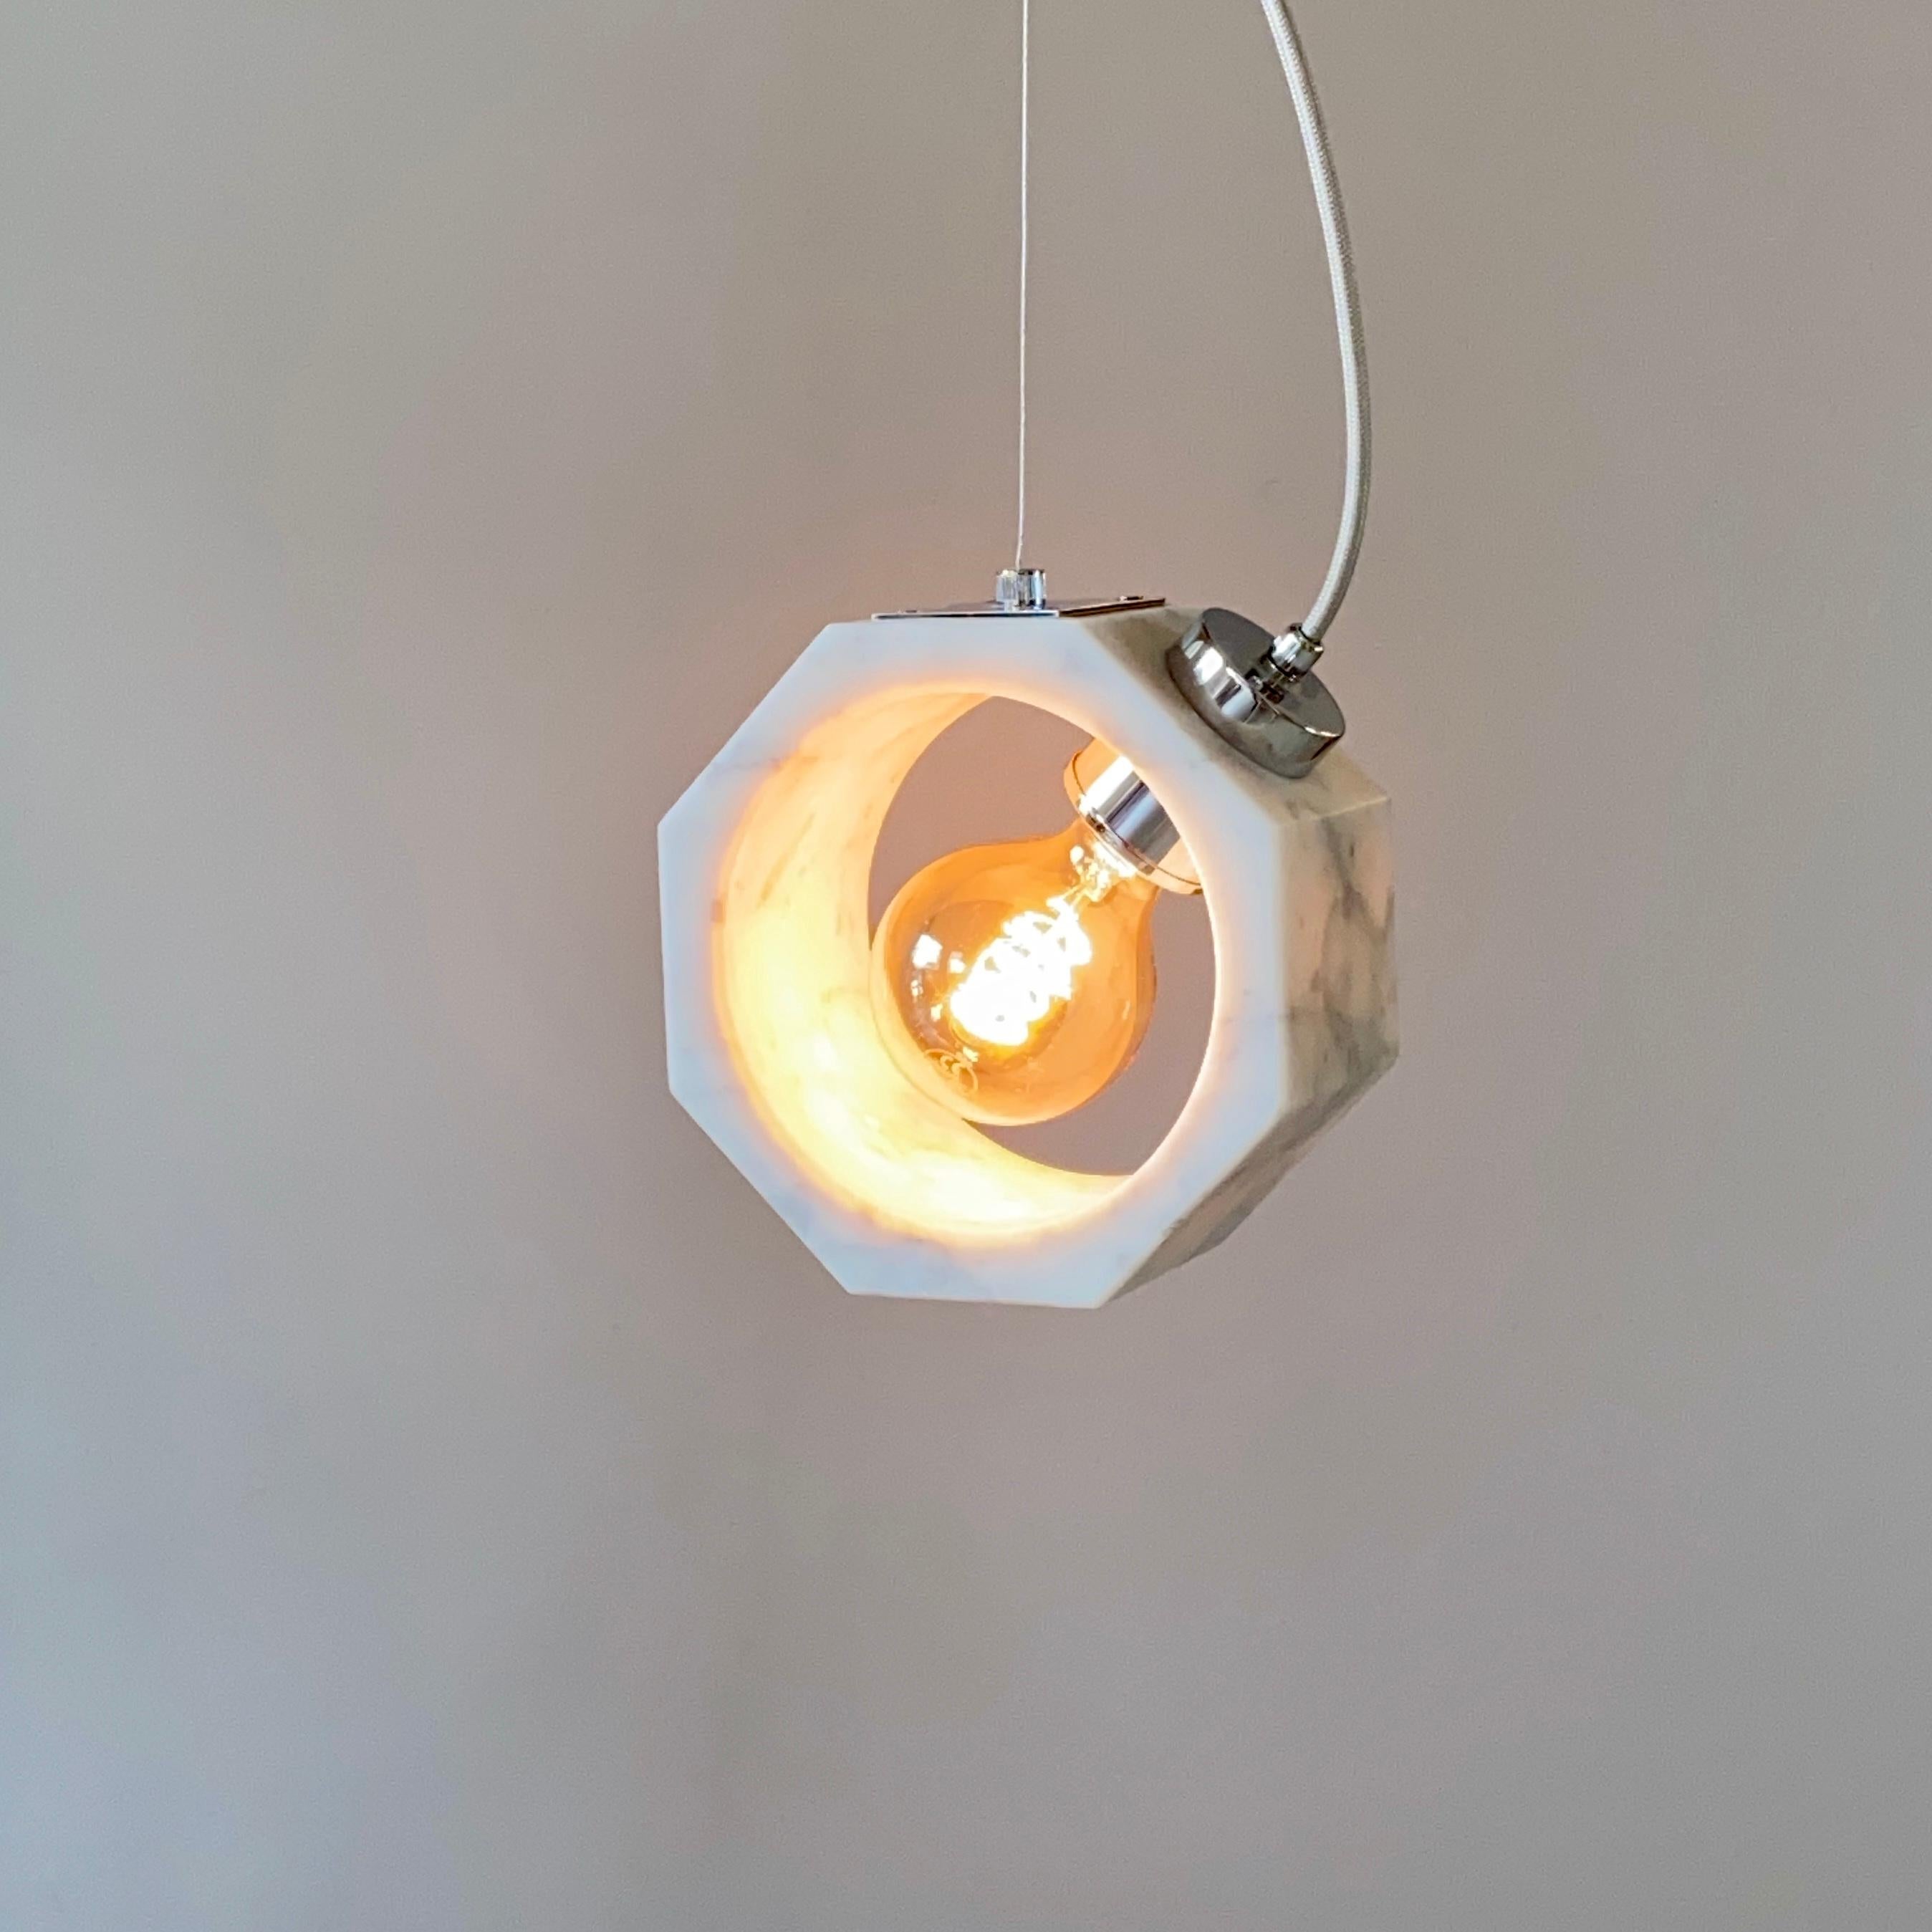 Cosulich interiors in collaboration with Matlight Studio: this pendant, part of the Italian Octagon collection, entirely handmade in Italy, has been developed keeping the essentiality as the core of the product, an organic monolithic block of white